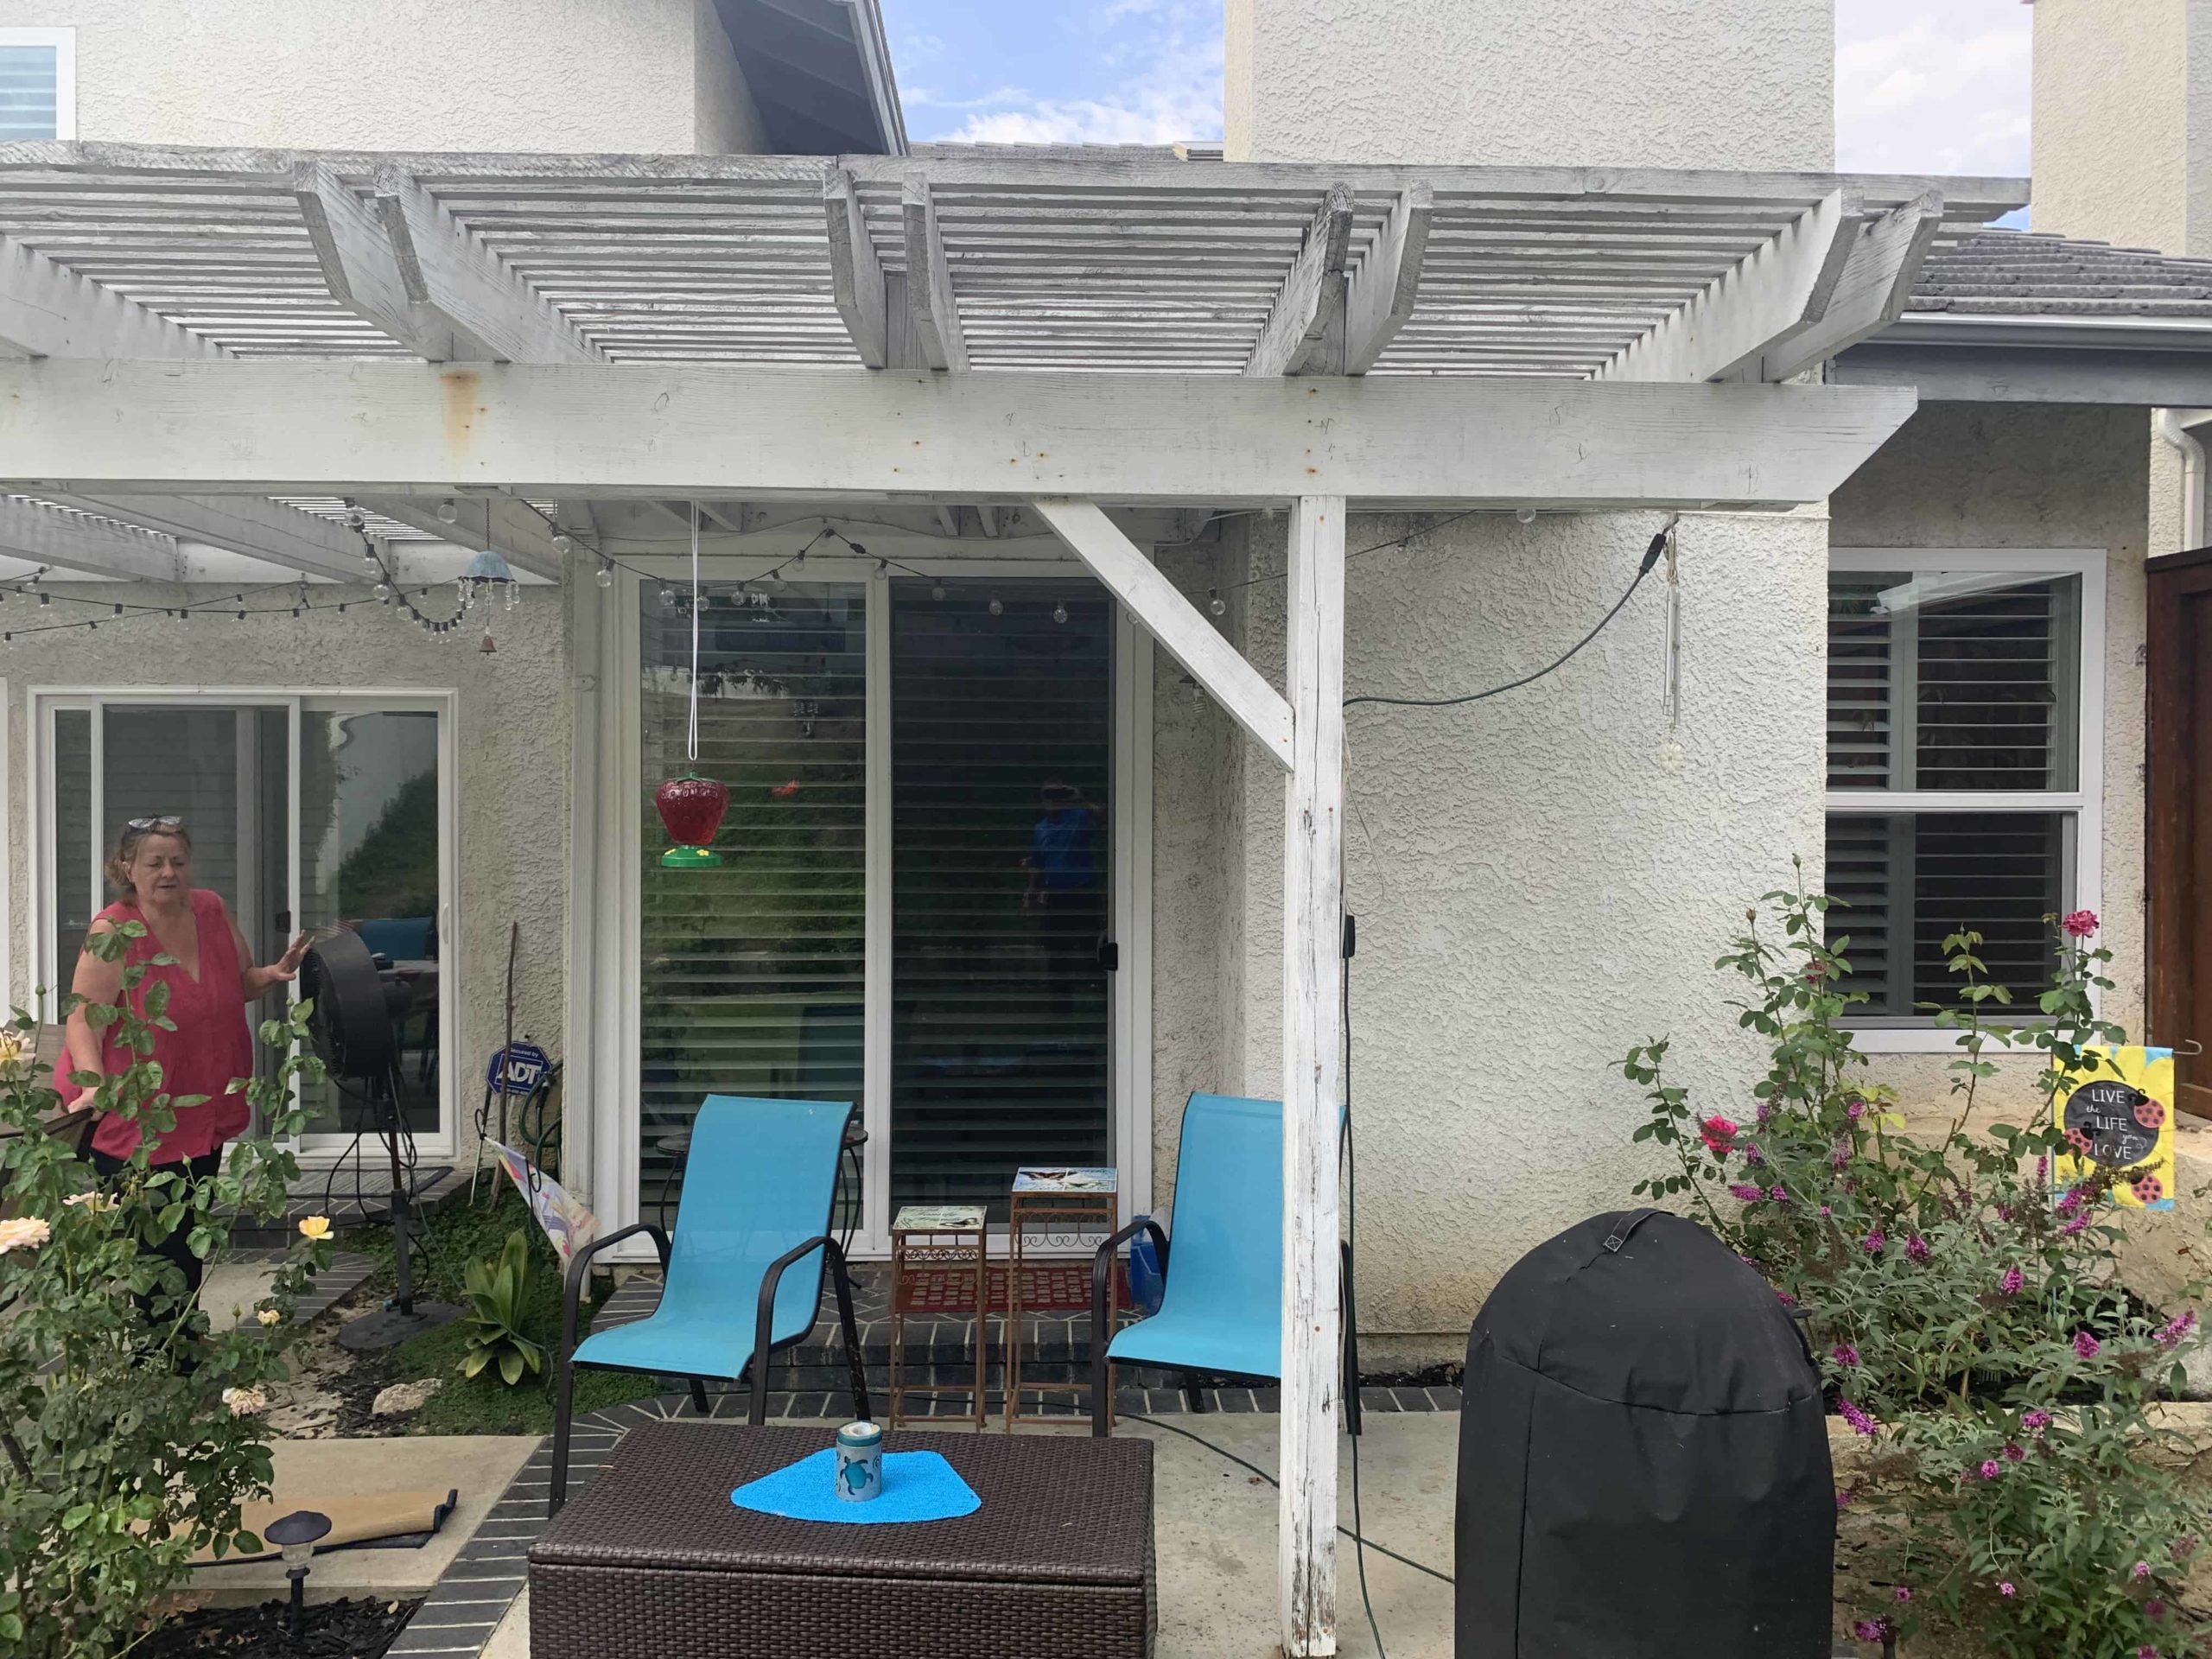 Alumawood Patio Covers in Dove Canyon, Remove & Replace